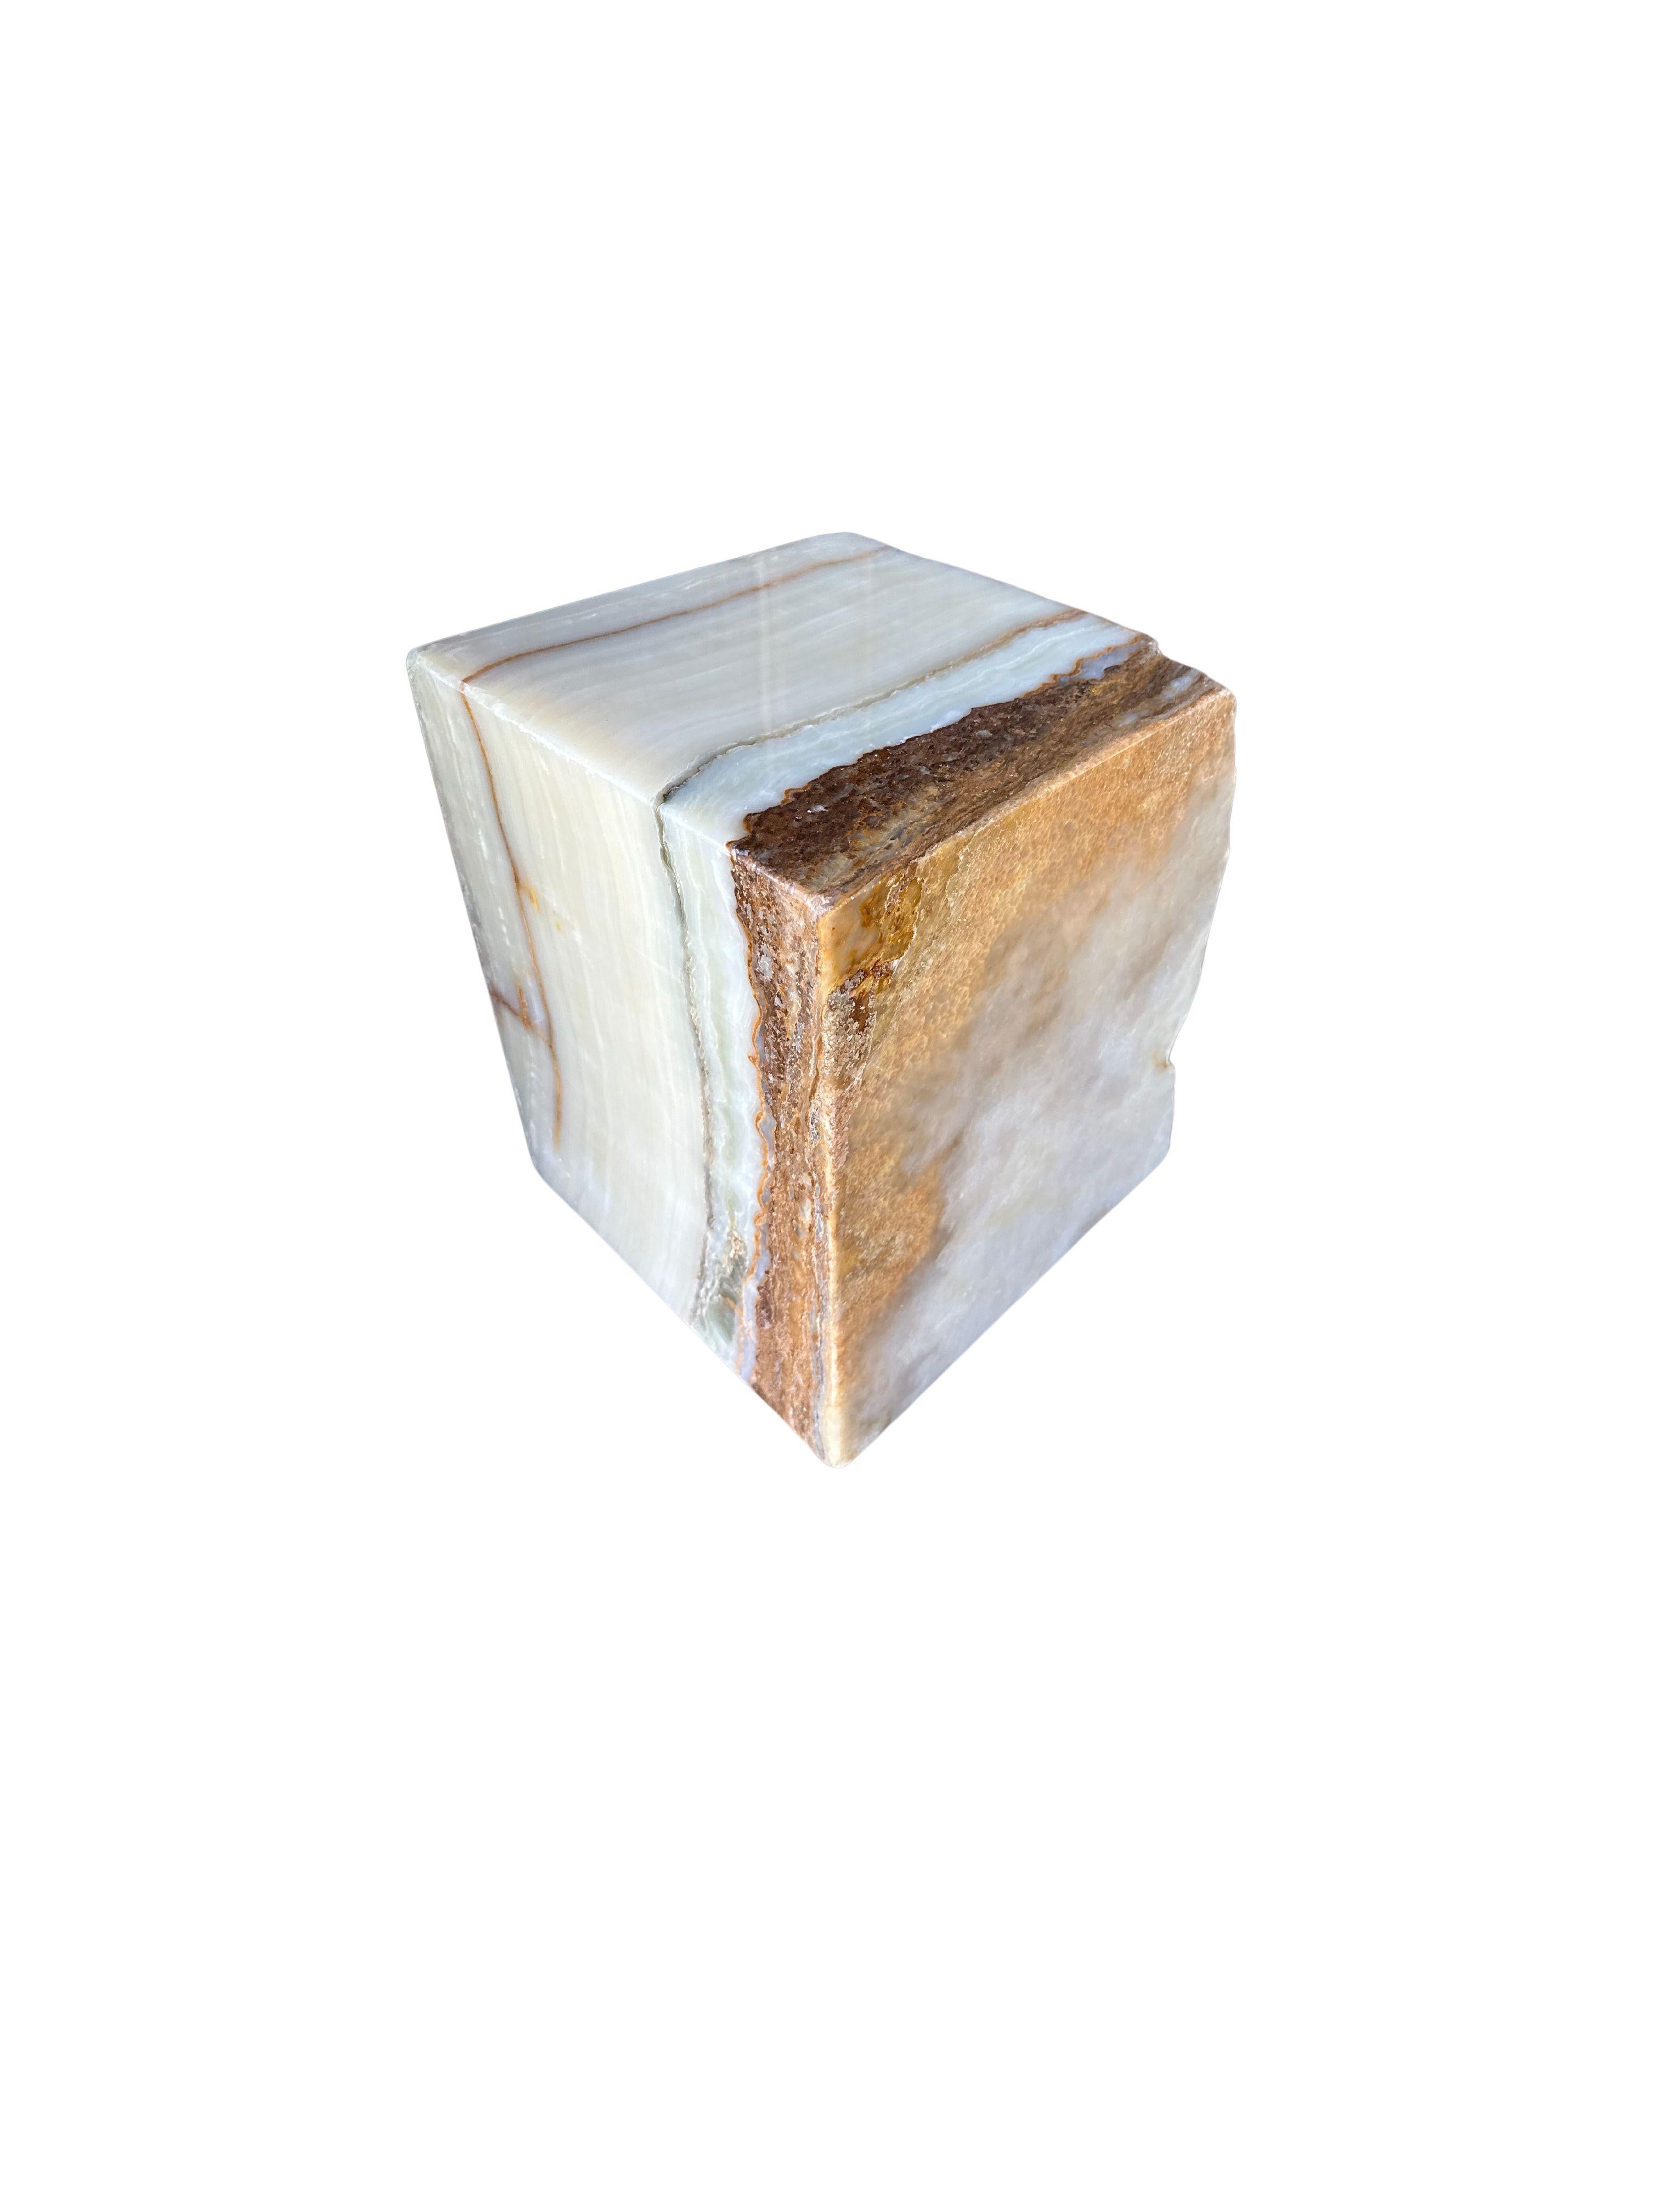 A Jupiter onyx solid marble block which serves as a wonderful side table or pedestal. Sourced on the island of Sumatra with earthy undertones, this raw and organic object features a stunning mix of textures and shades. The mix of smooth and rough